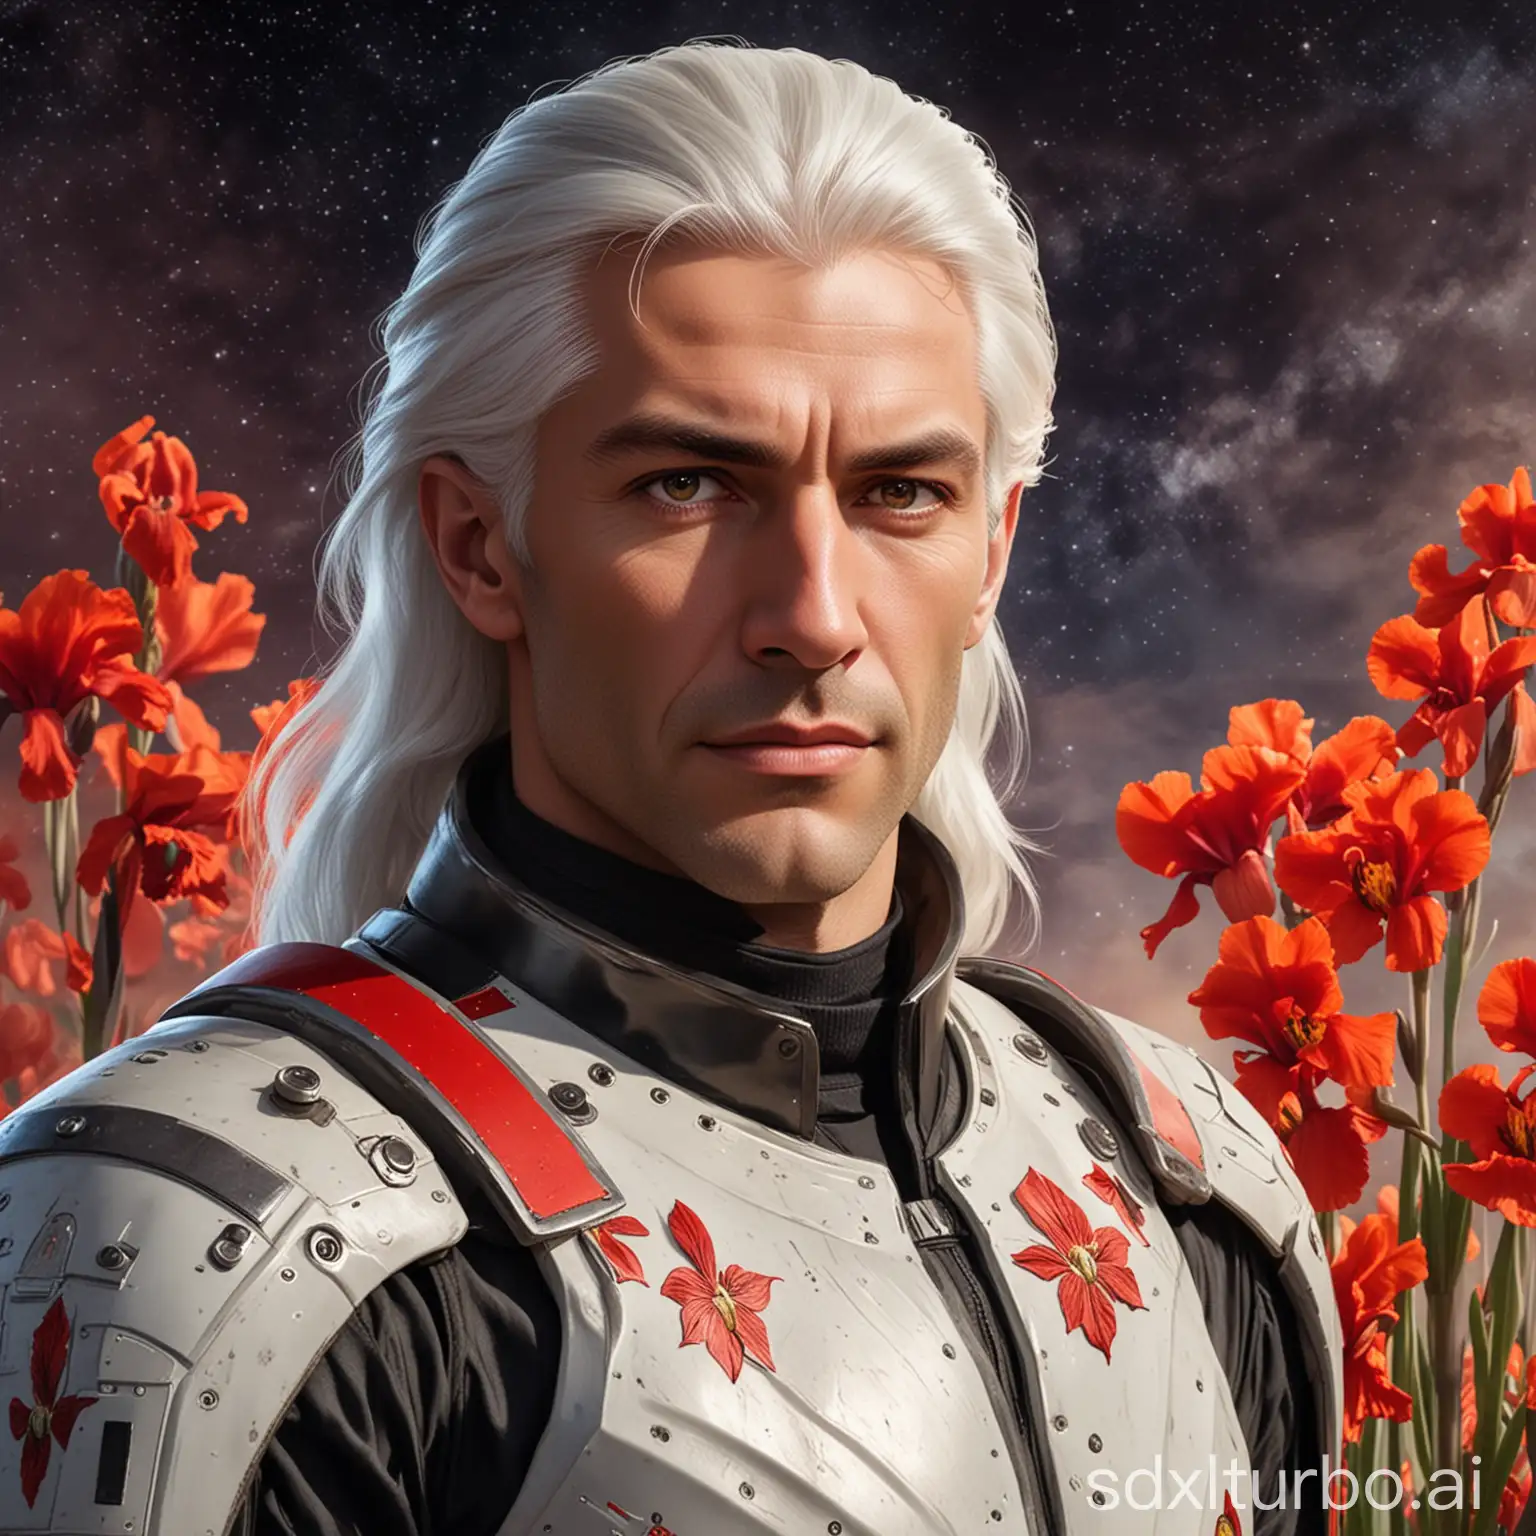 WhiteHaired-Space-Officer-Atlan-of-Gonozal-from-Arkon-in-Red-Iris-Stare